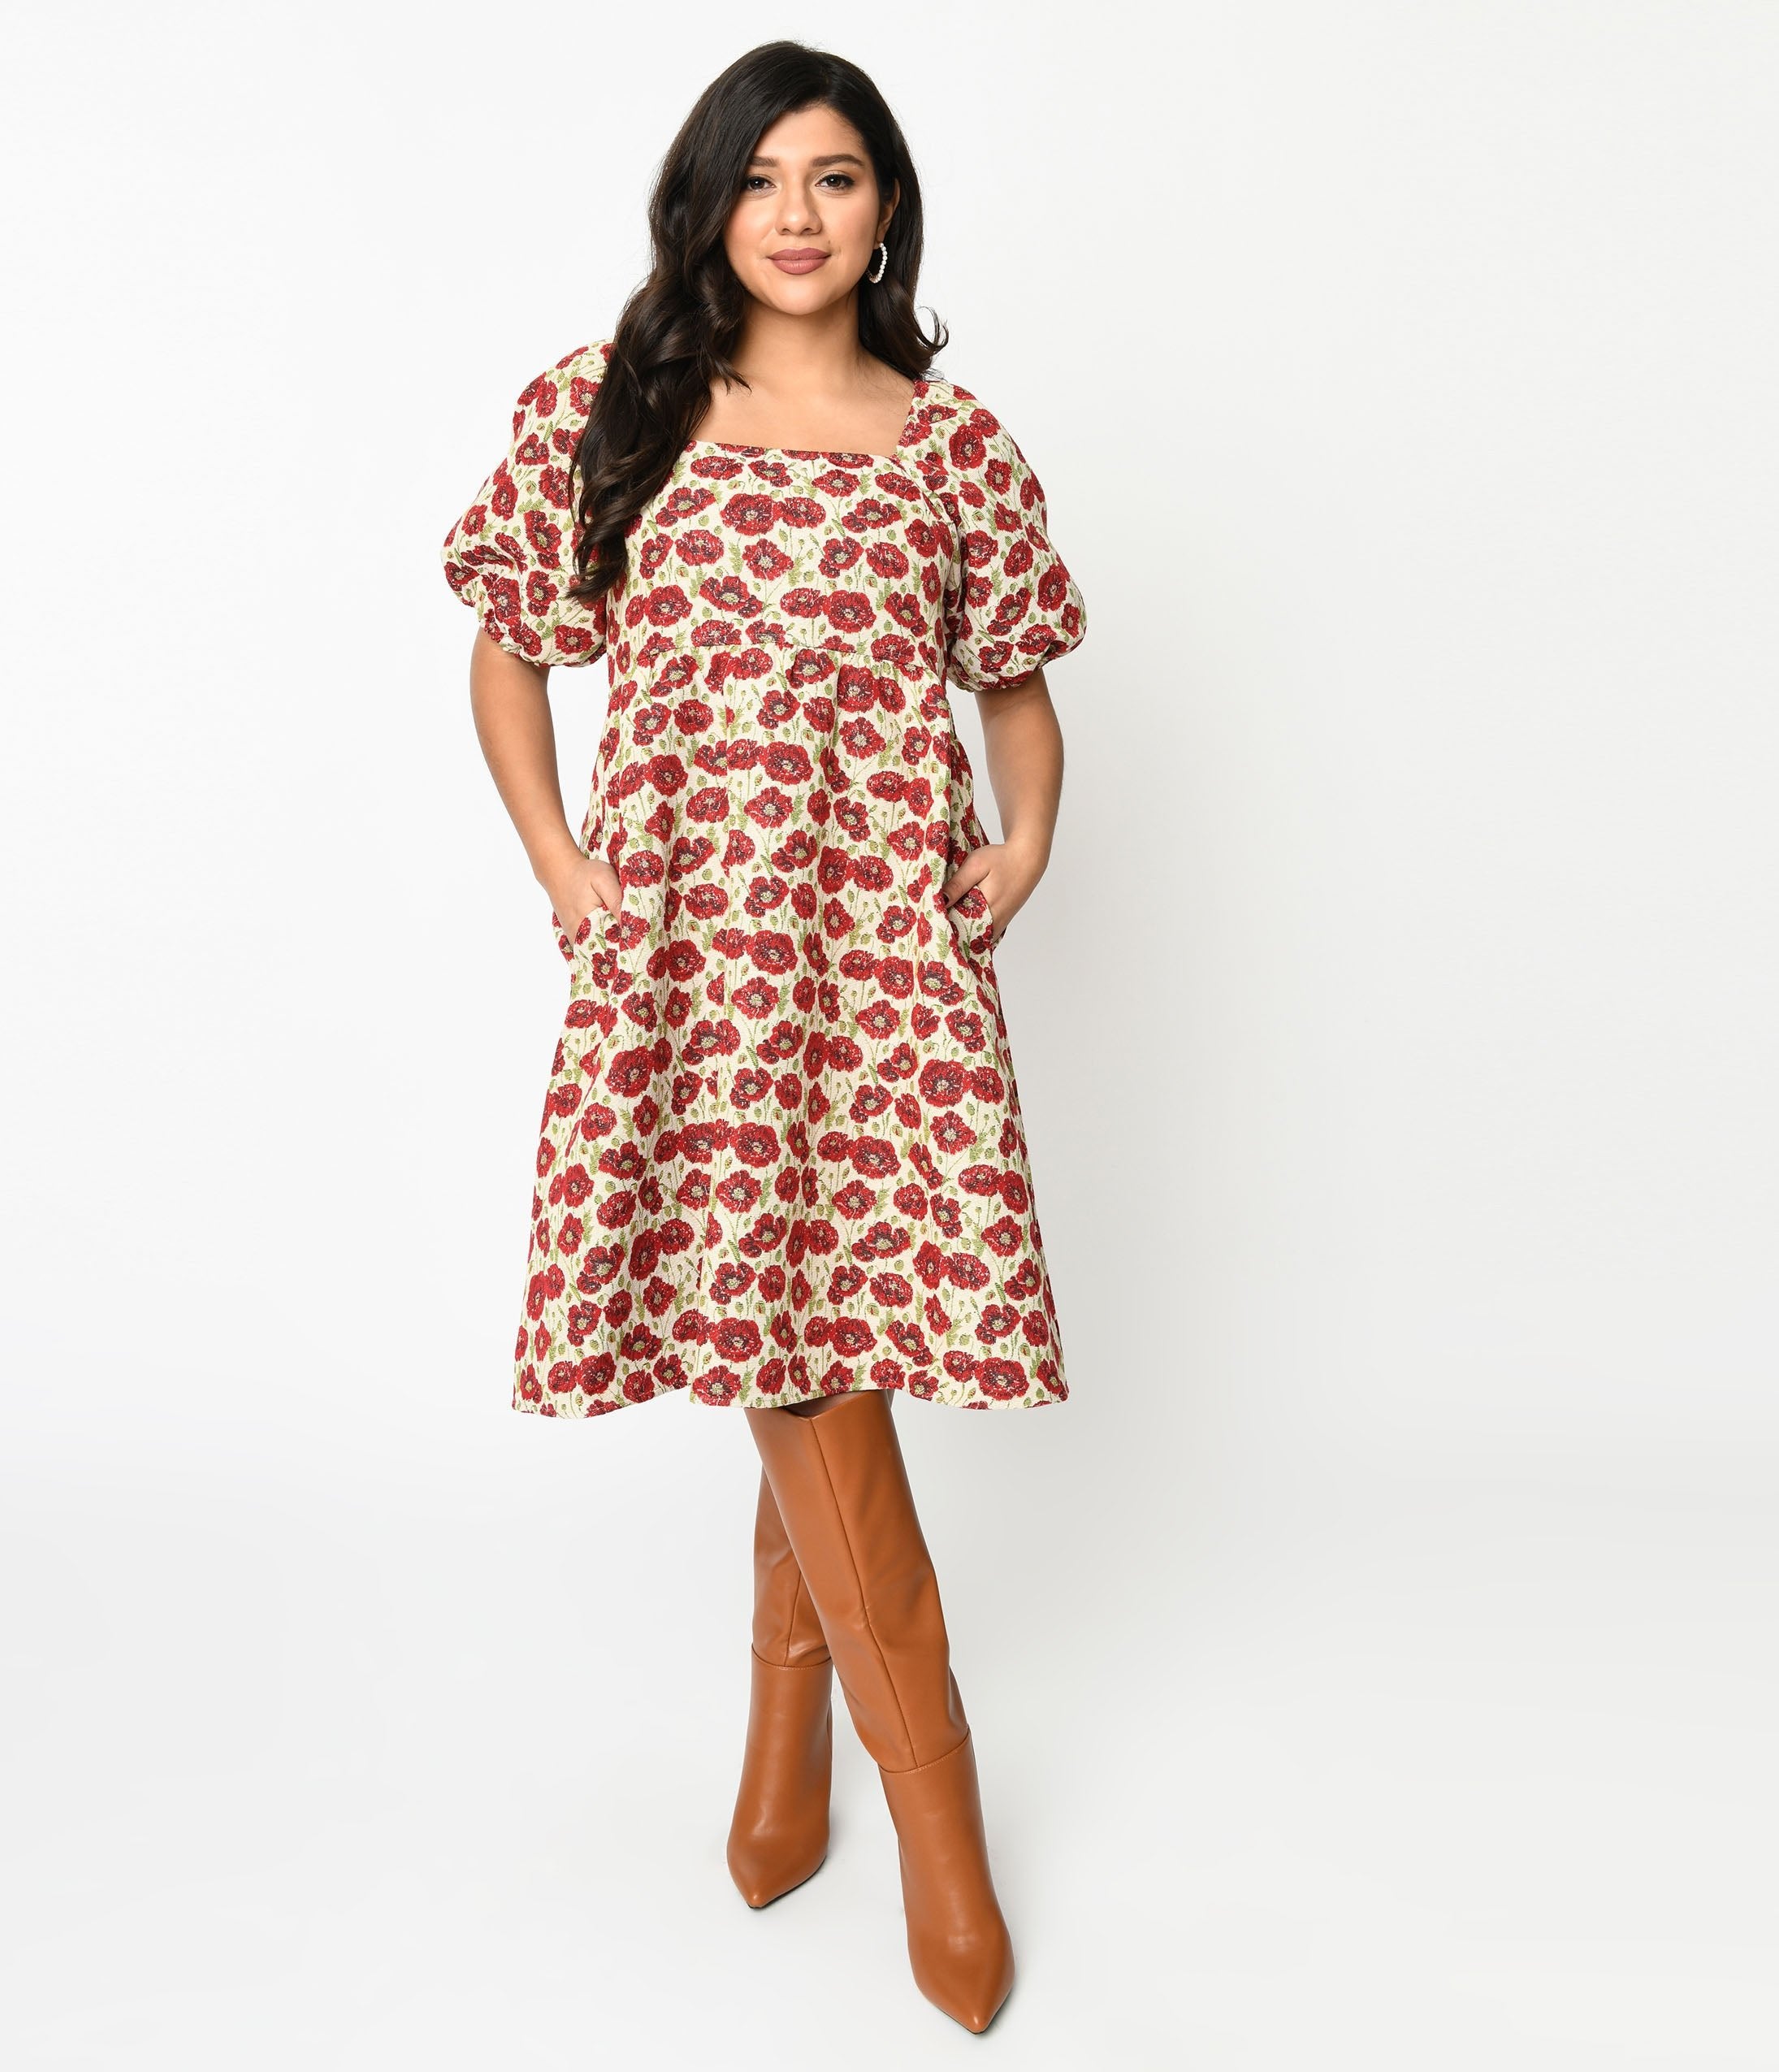 

Ivory & Red Floral Kiss Jacquard Fit & Flare Dress